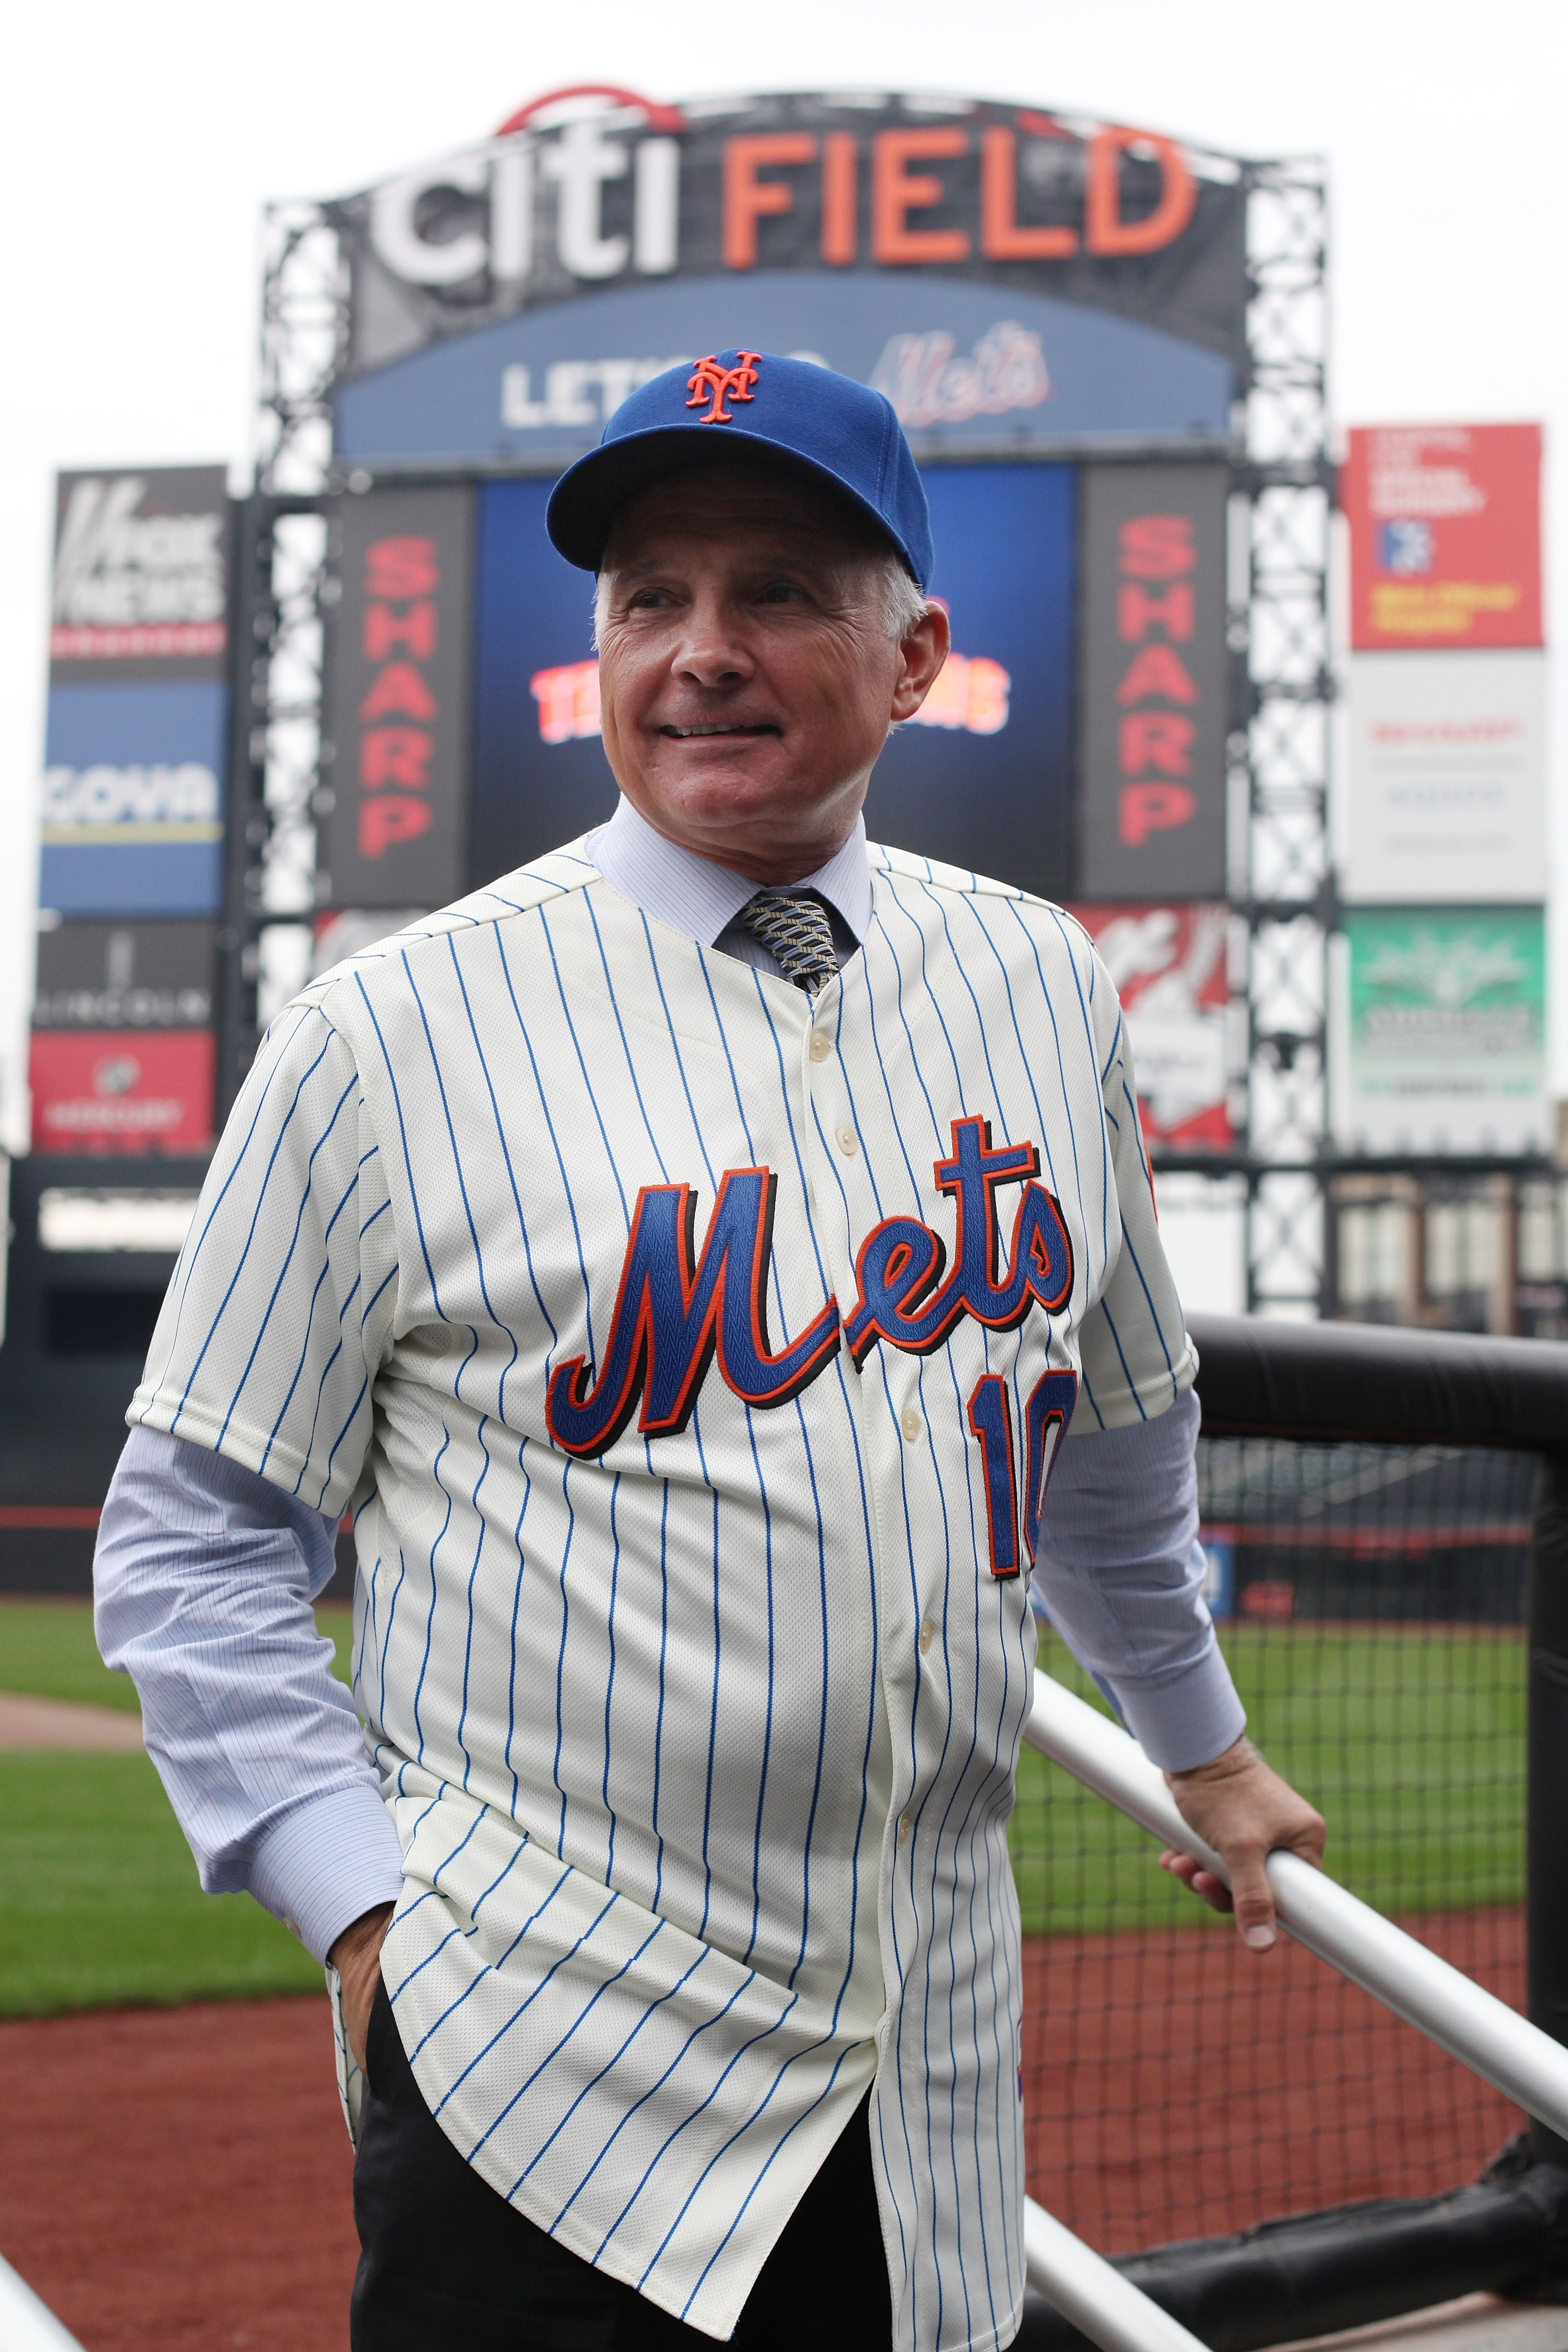 Terry Collins, you're out of luck with this team you inherited.